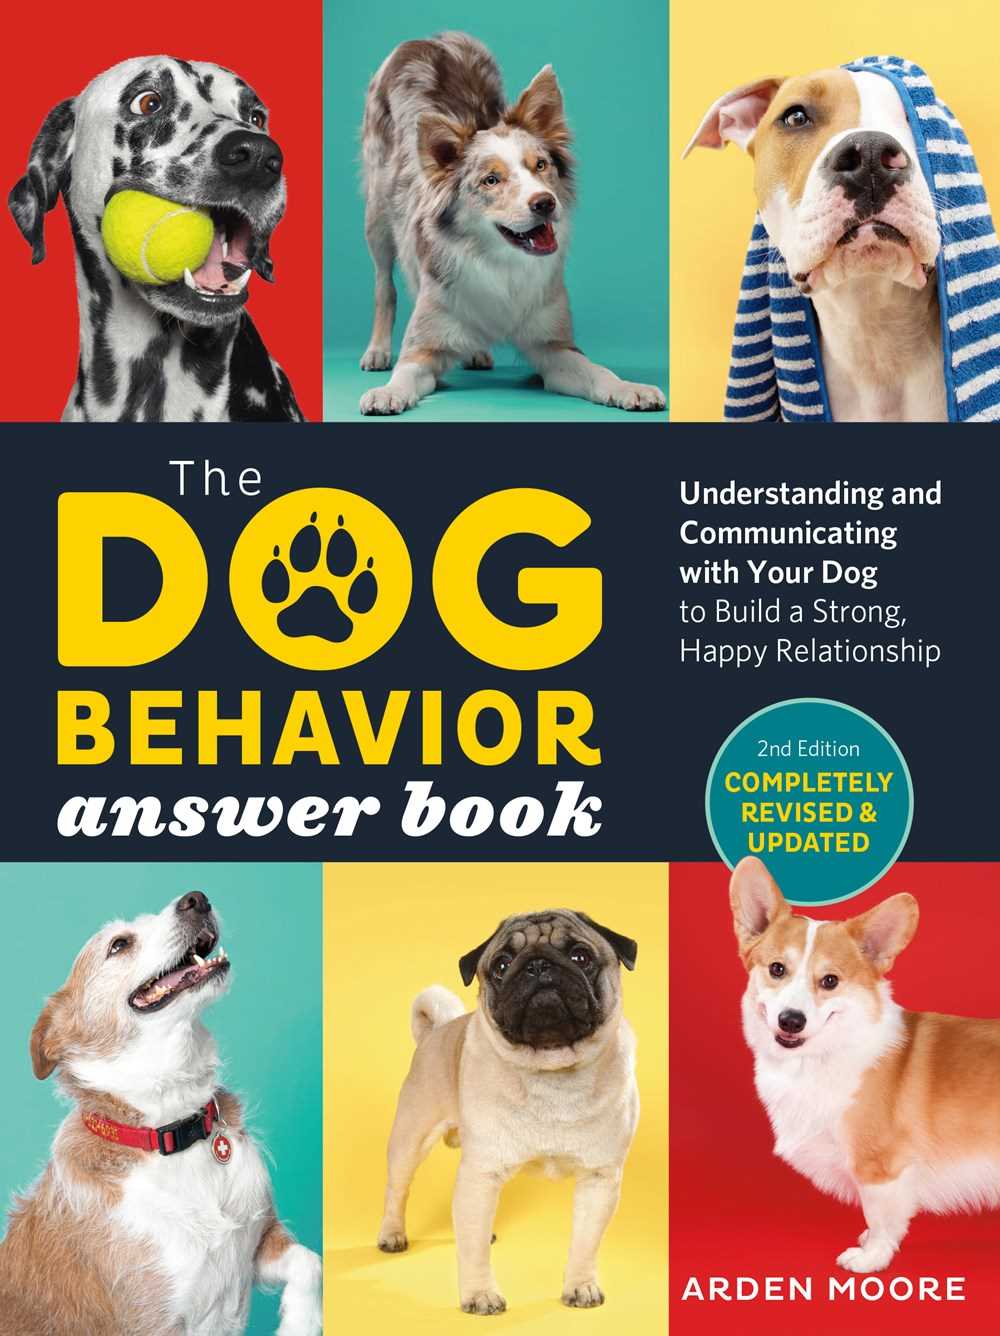 The Dog Behavior Answer Book (2nd Edition)